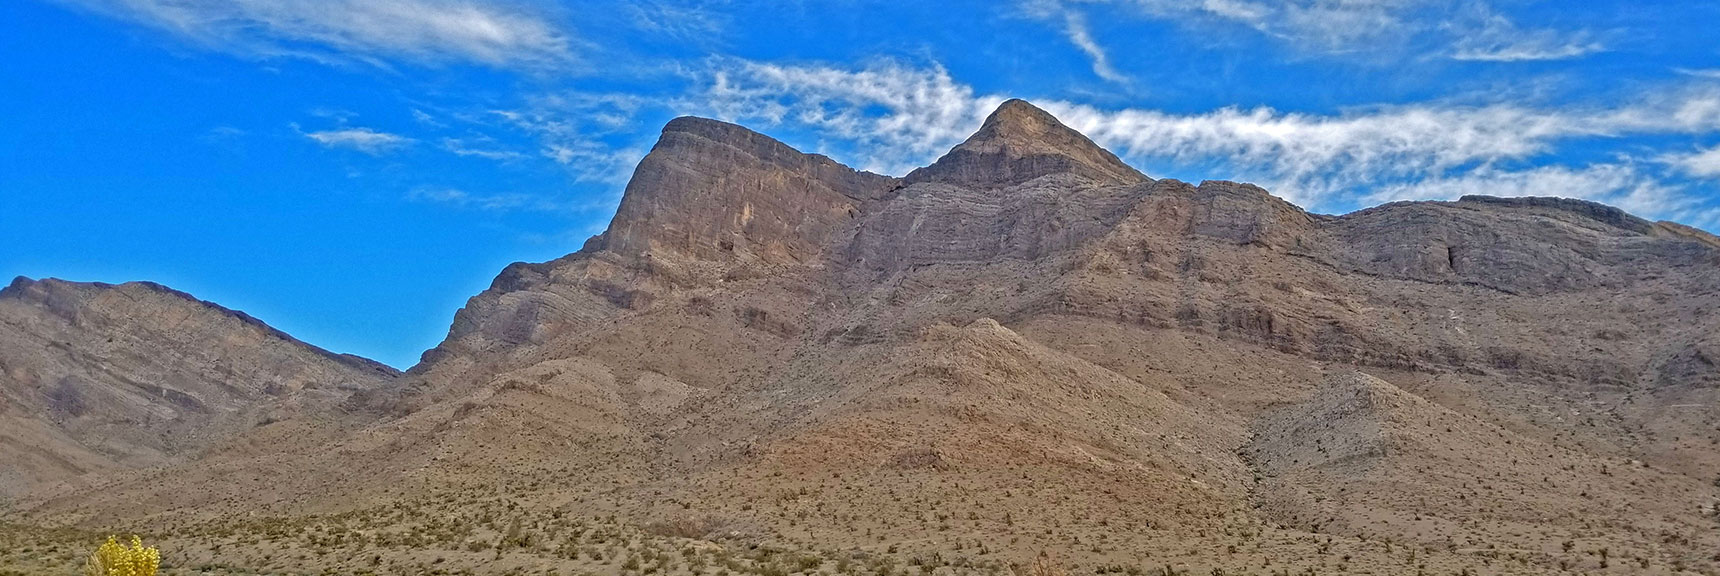 High Points in Ridge System Mirror La Madre & El Padre Mountains Formation | Little Red Rock Las Vegas, Nevada, Near La Madre Mountains Wilderness